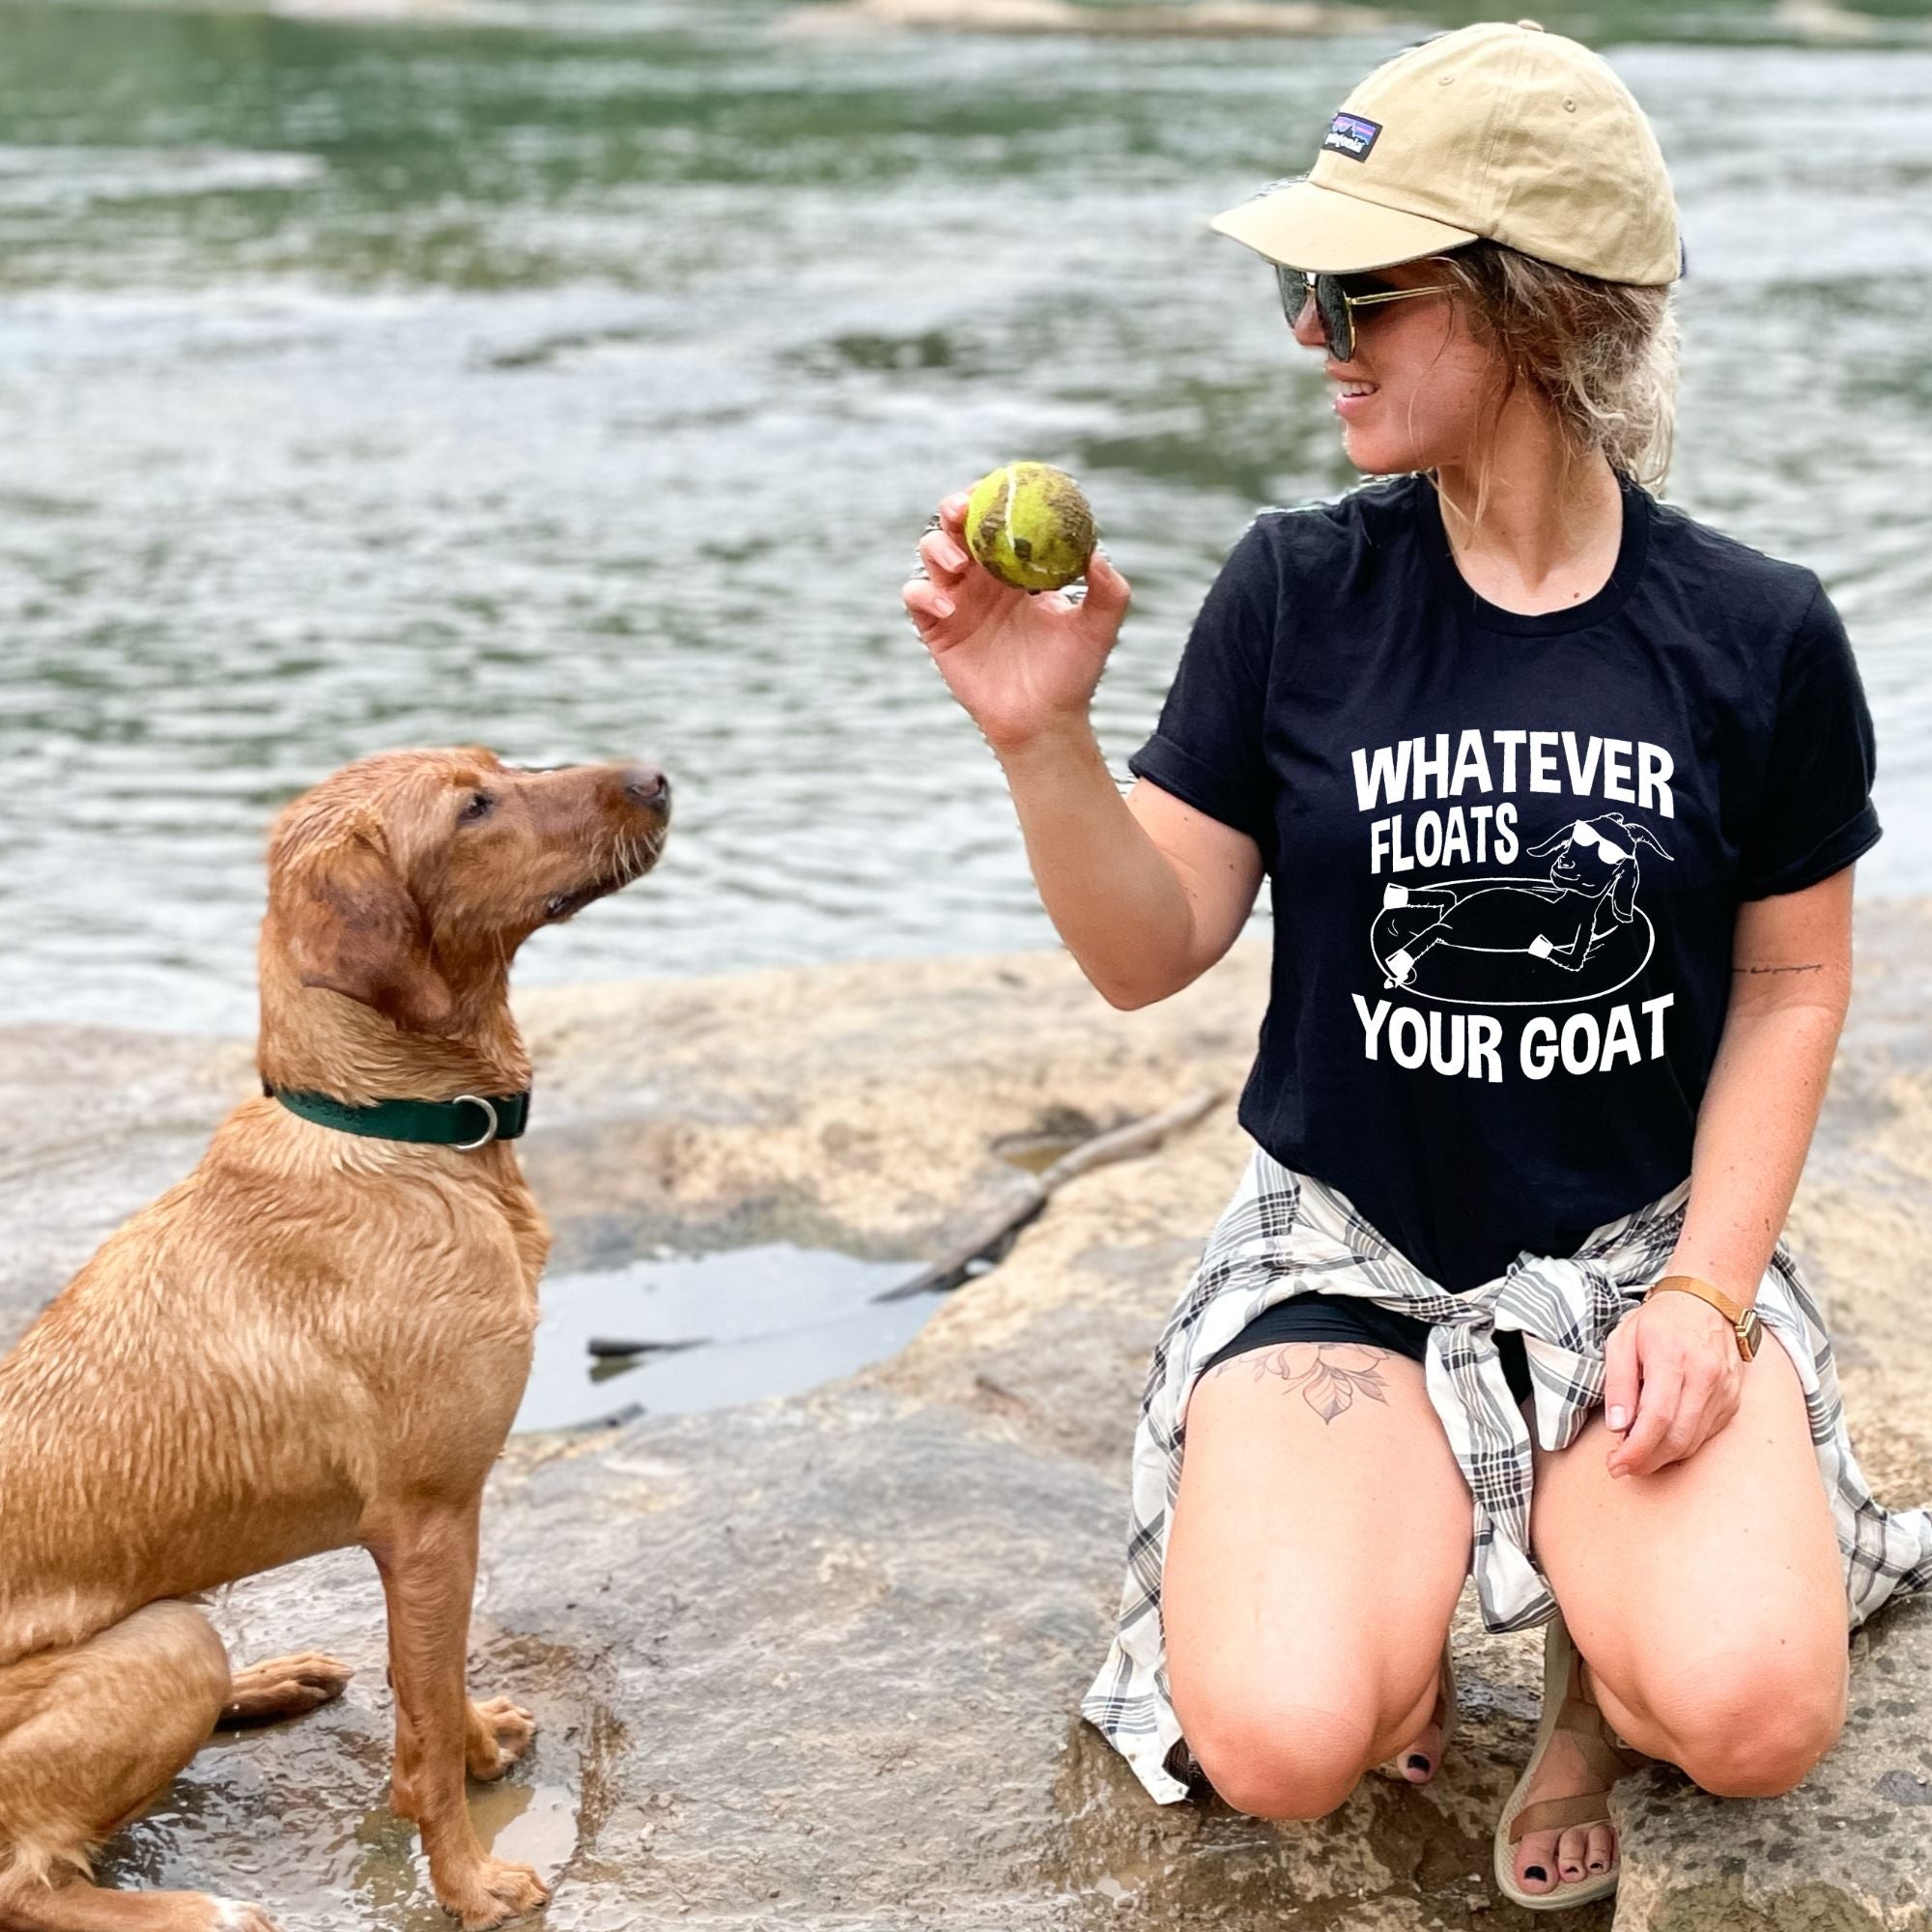 Hilarious Goat Shirt for Floating the River *UNISEX FIT*-208 Tees Wholesale, Idaho